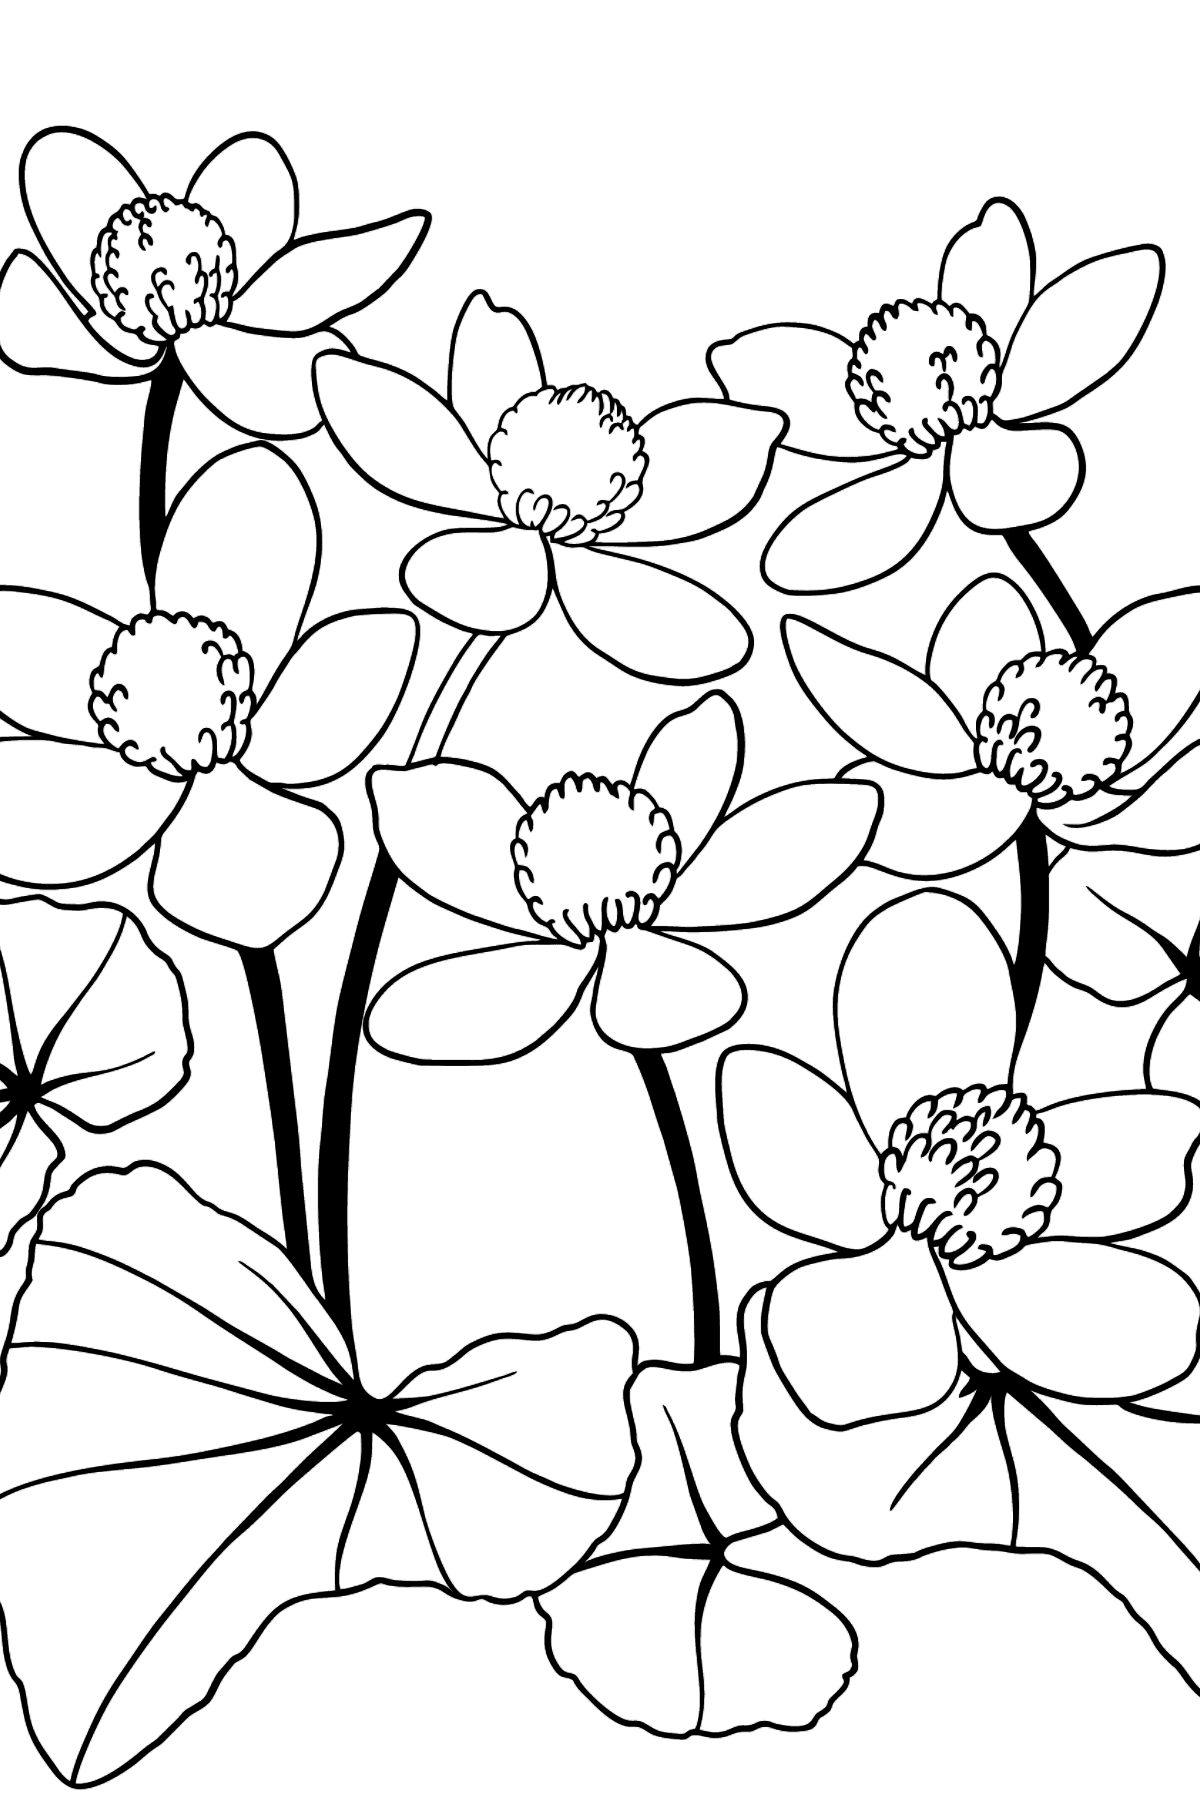 Flower Coloring Page - A Marsh Marigold with Yellow Petals - Coloring Pages for Kids